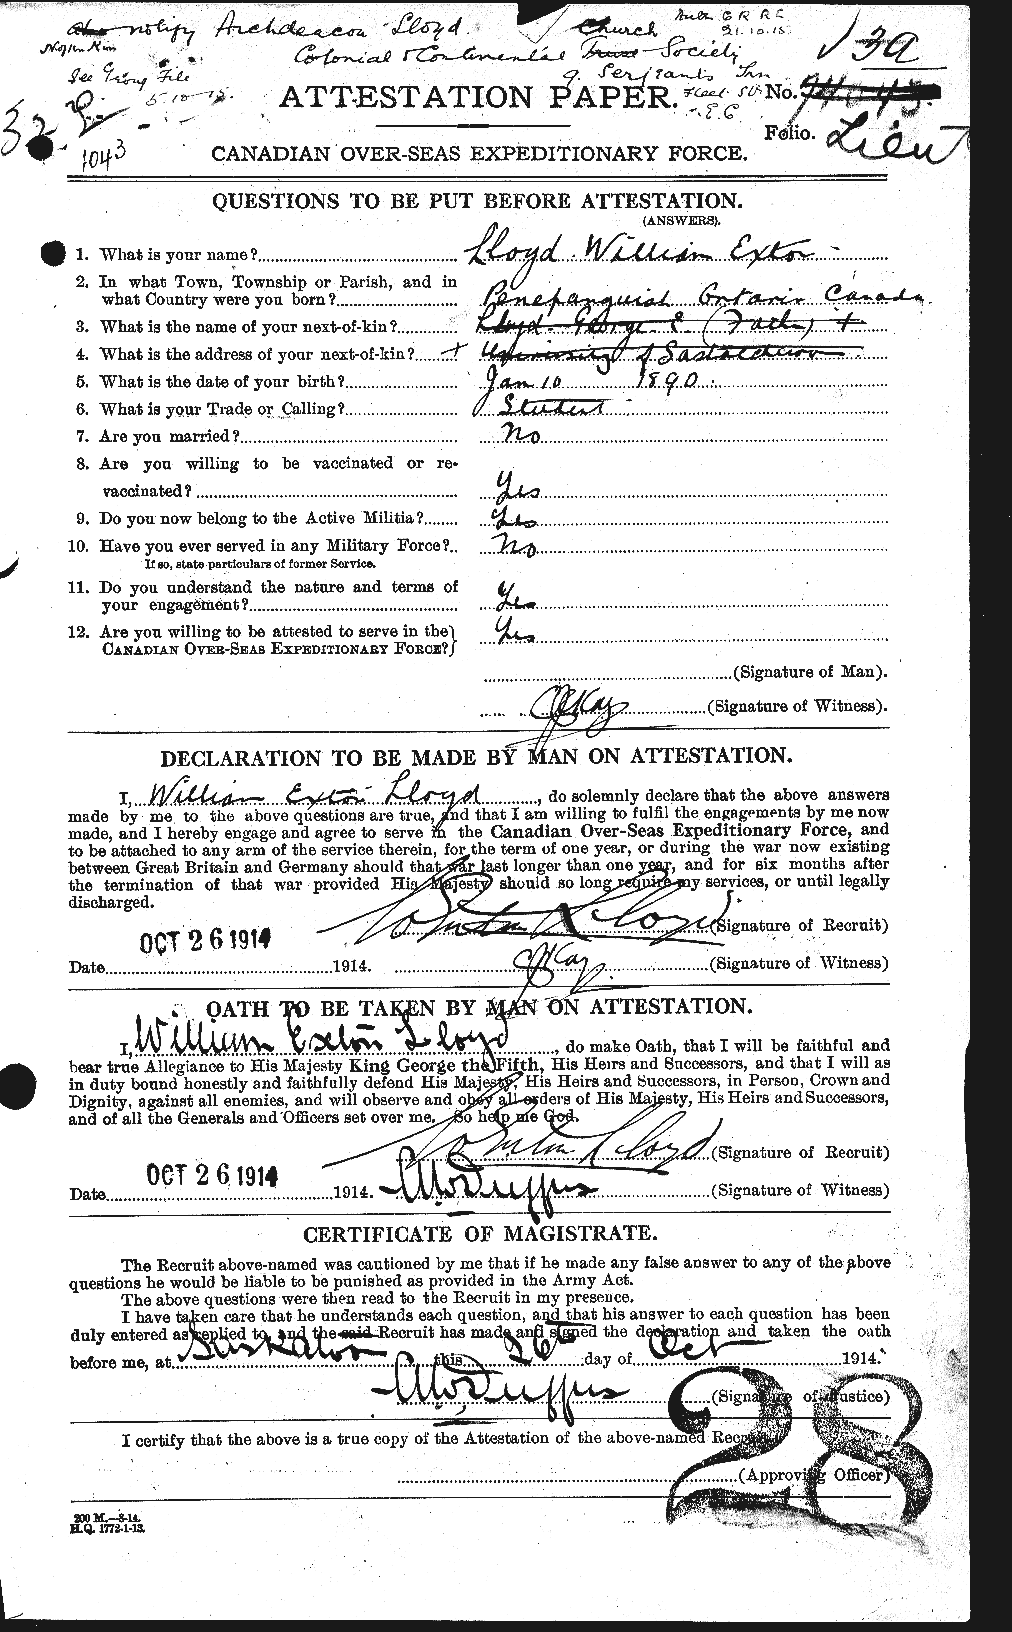 Personnel Records of the First World War - CEF 469312a